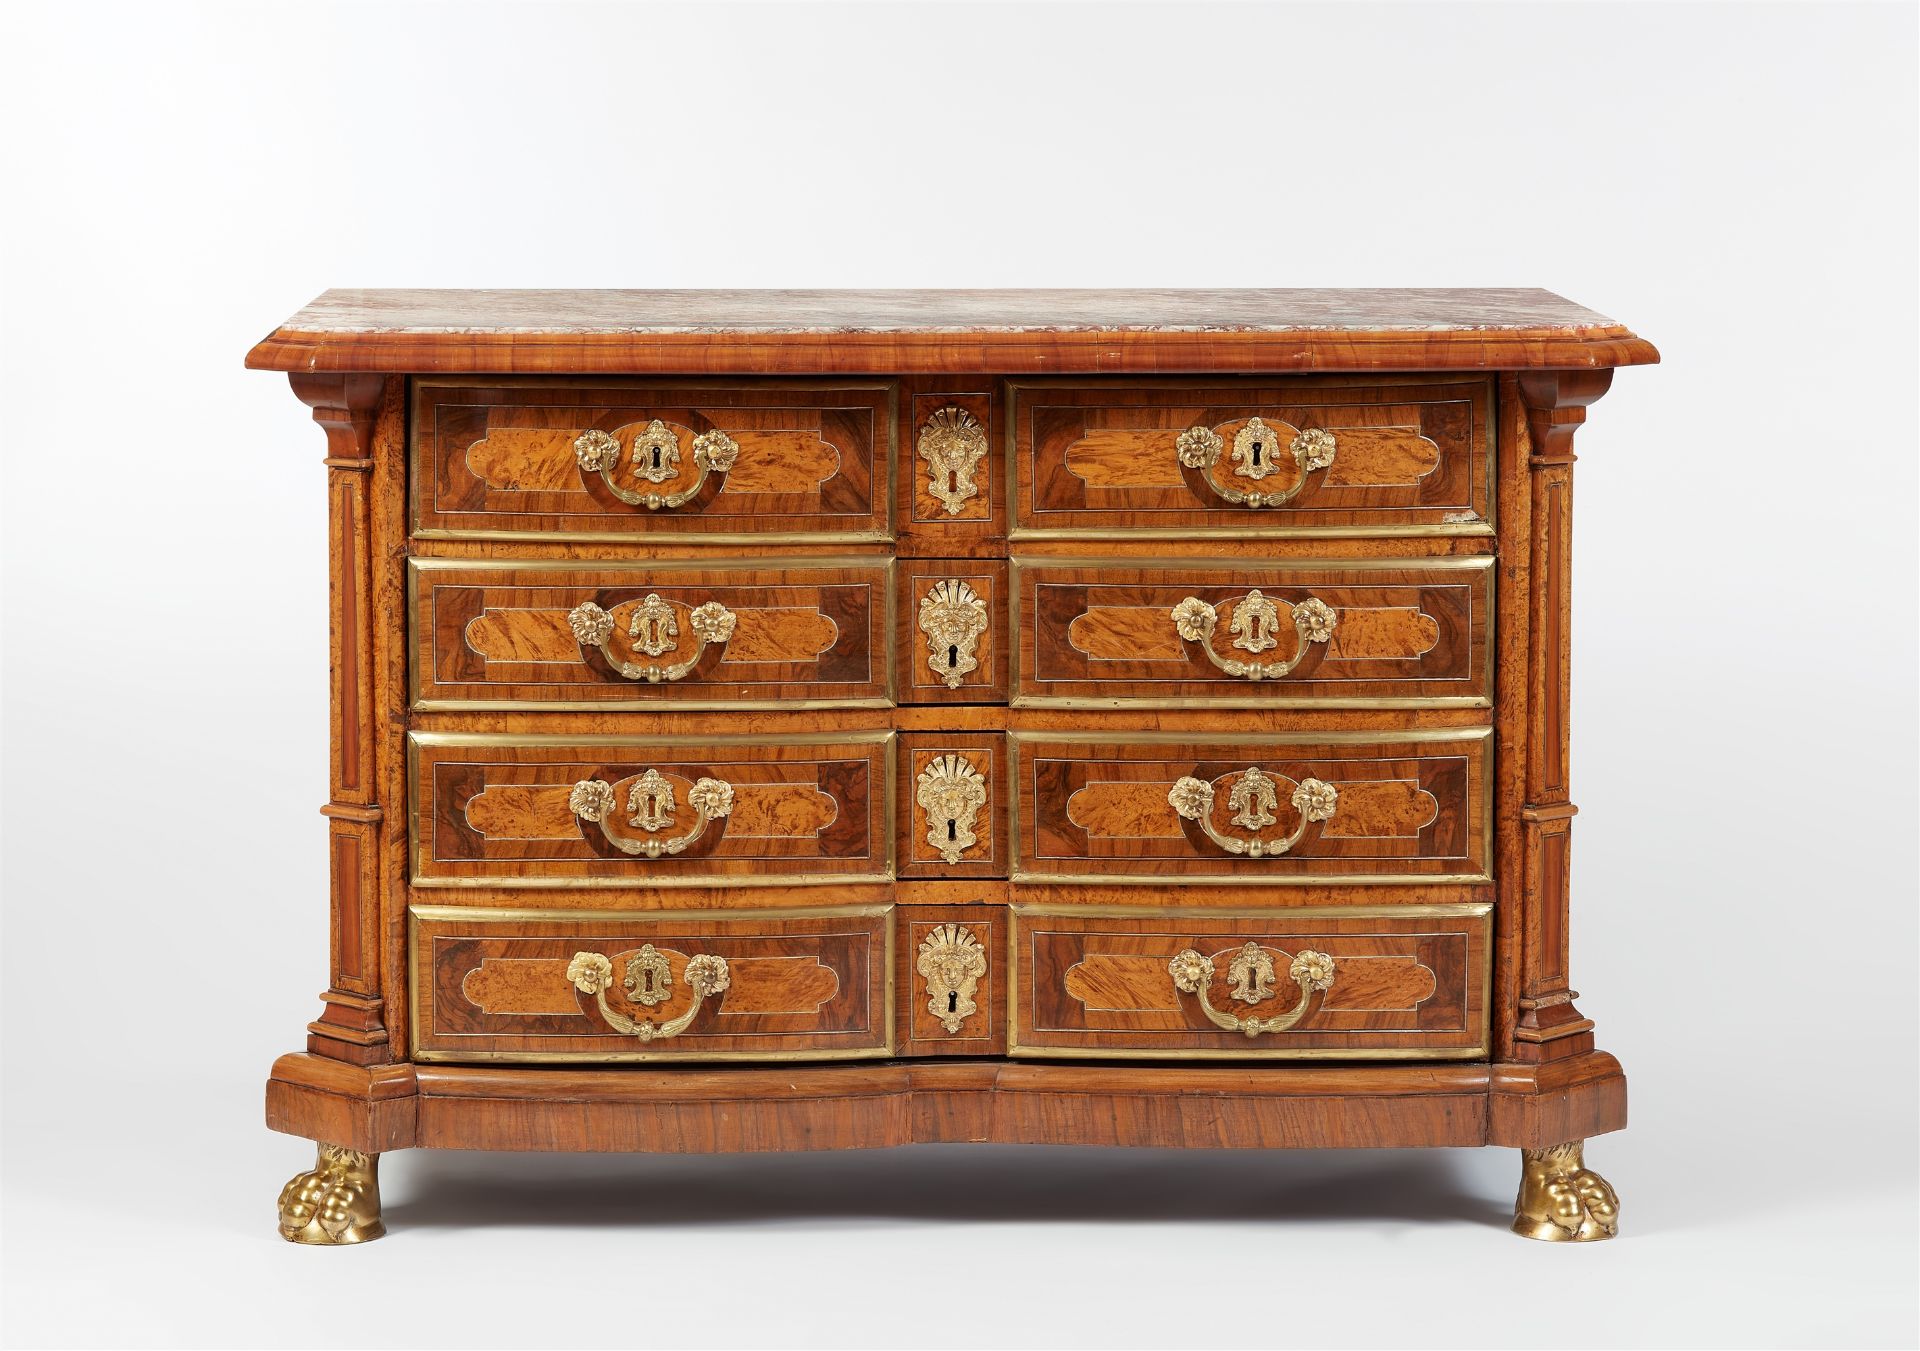 A Régence walnut chest of drawers with corner pilasters